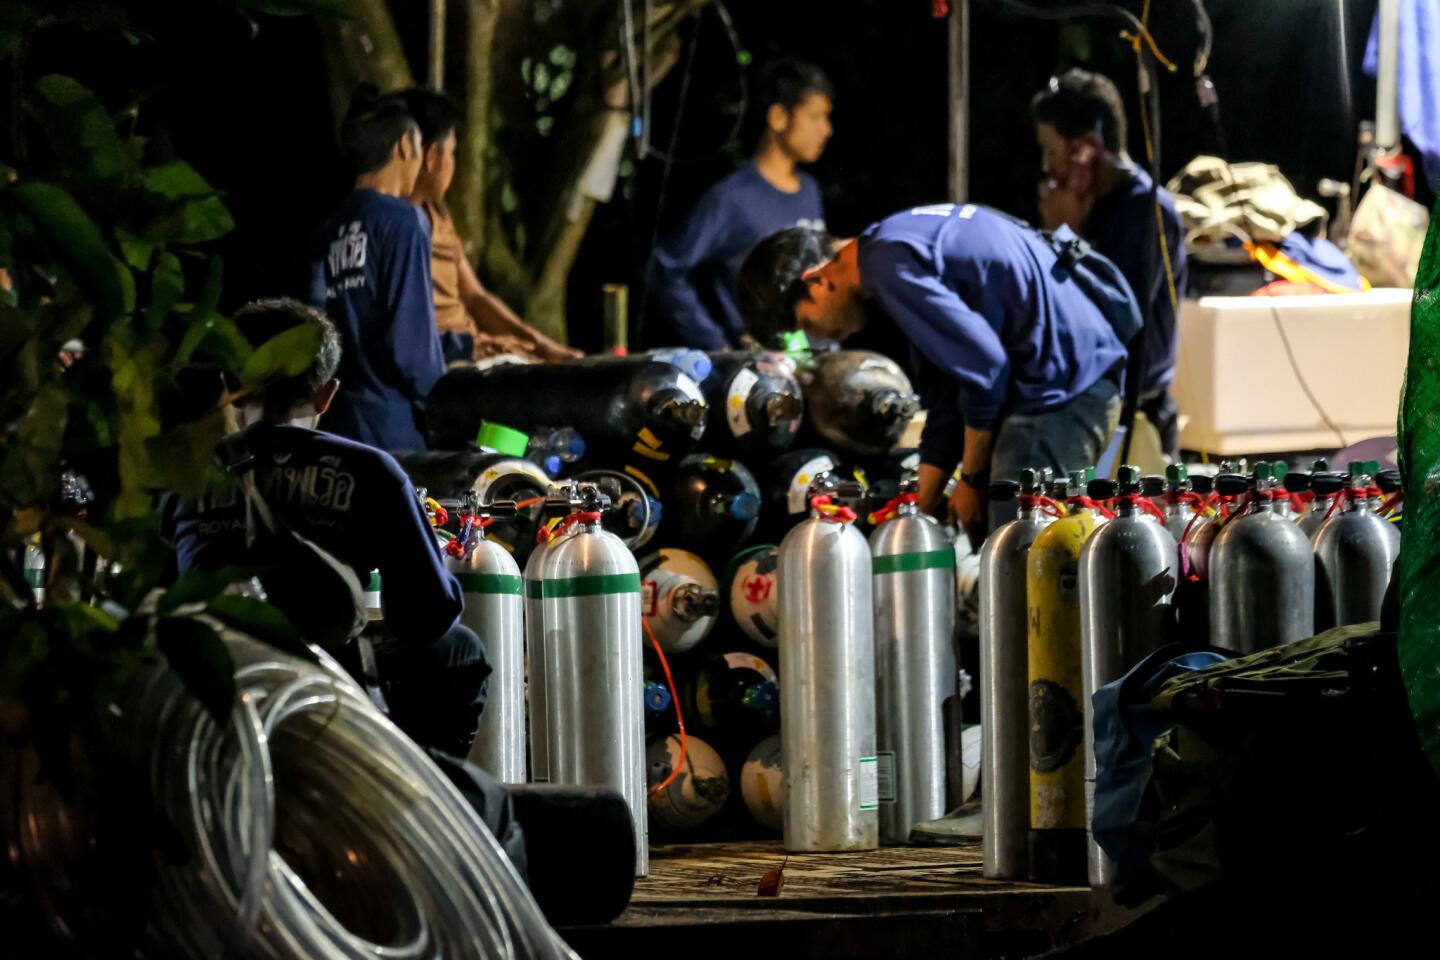 Diving cylinders are prepared at a makeshift camp at the entrance of Tham Luang Nang Non caves.